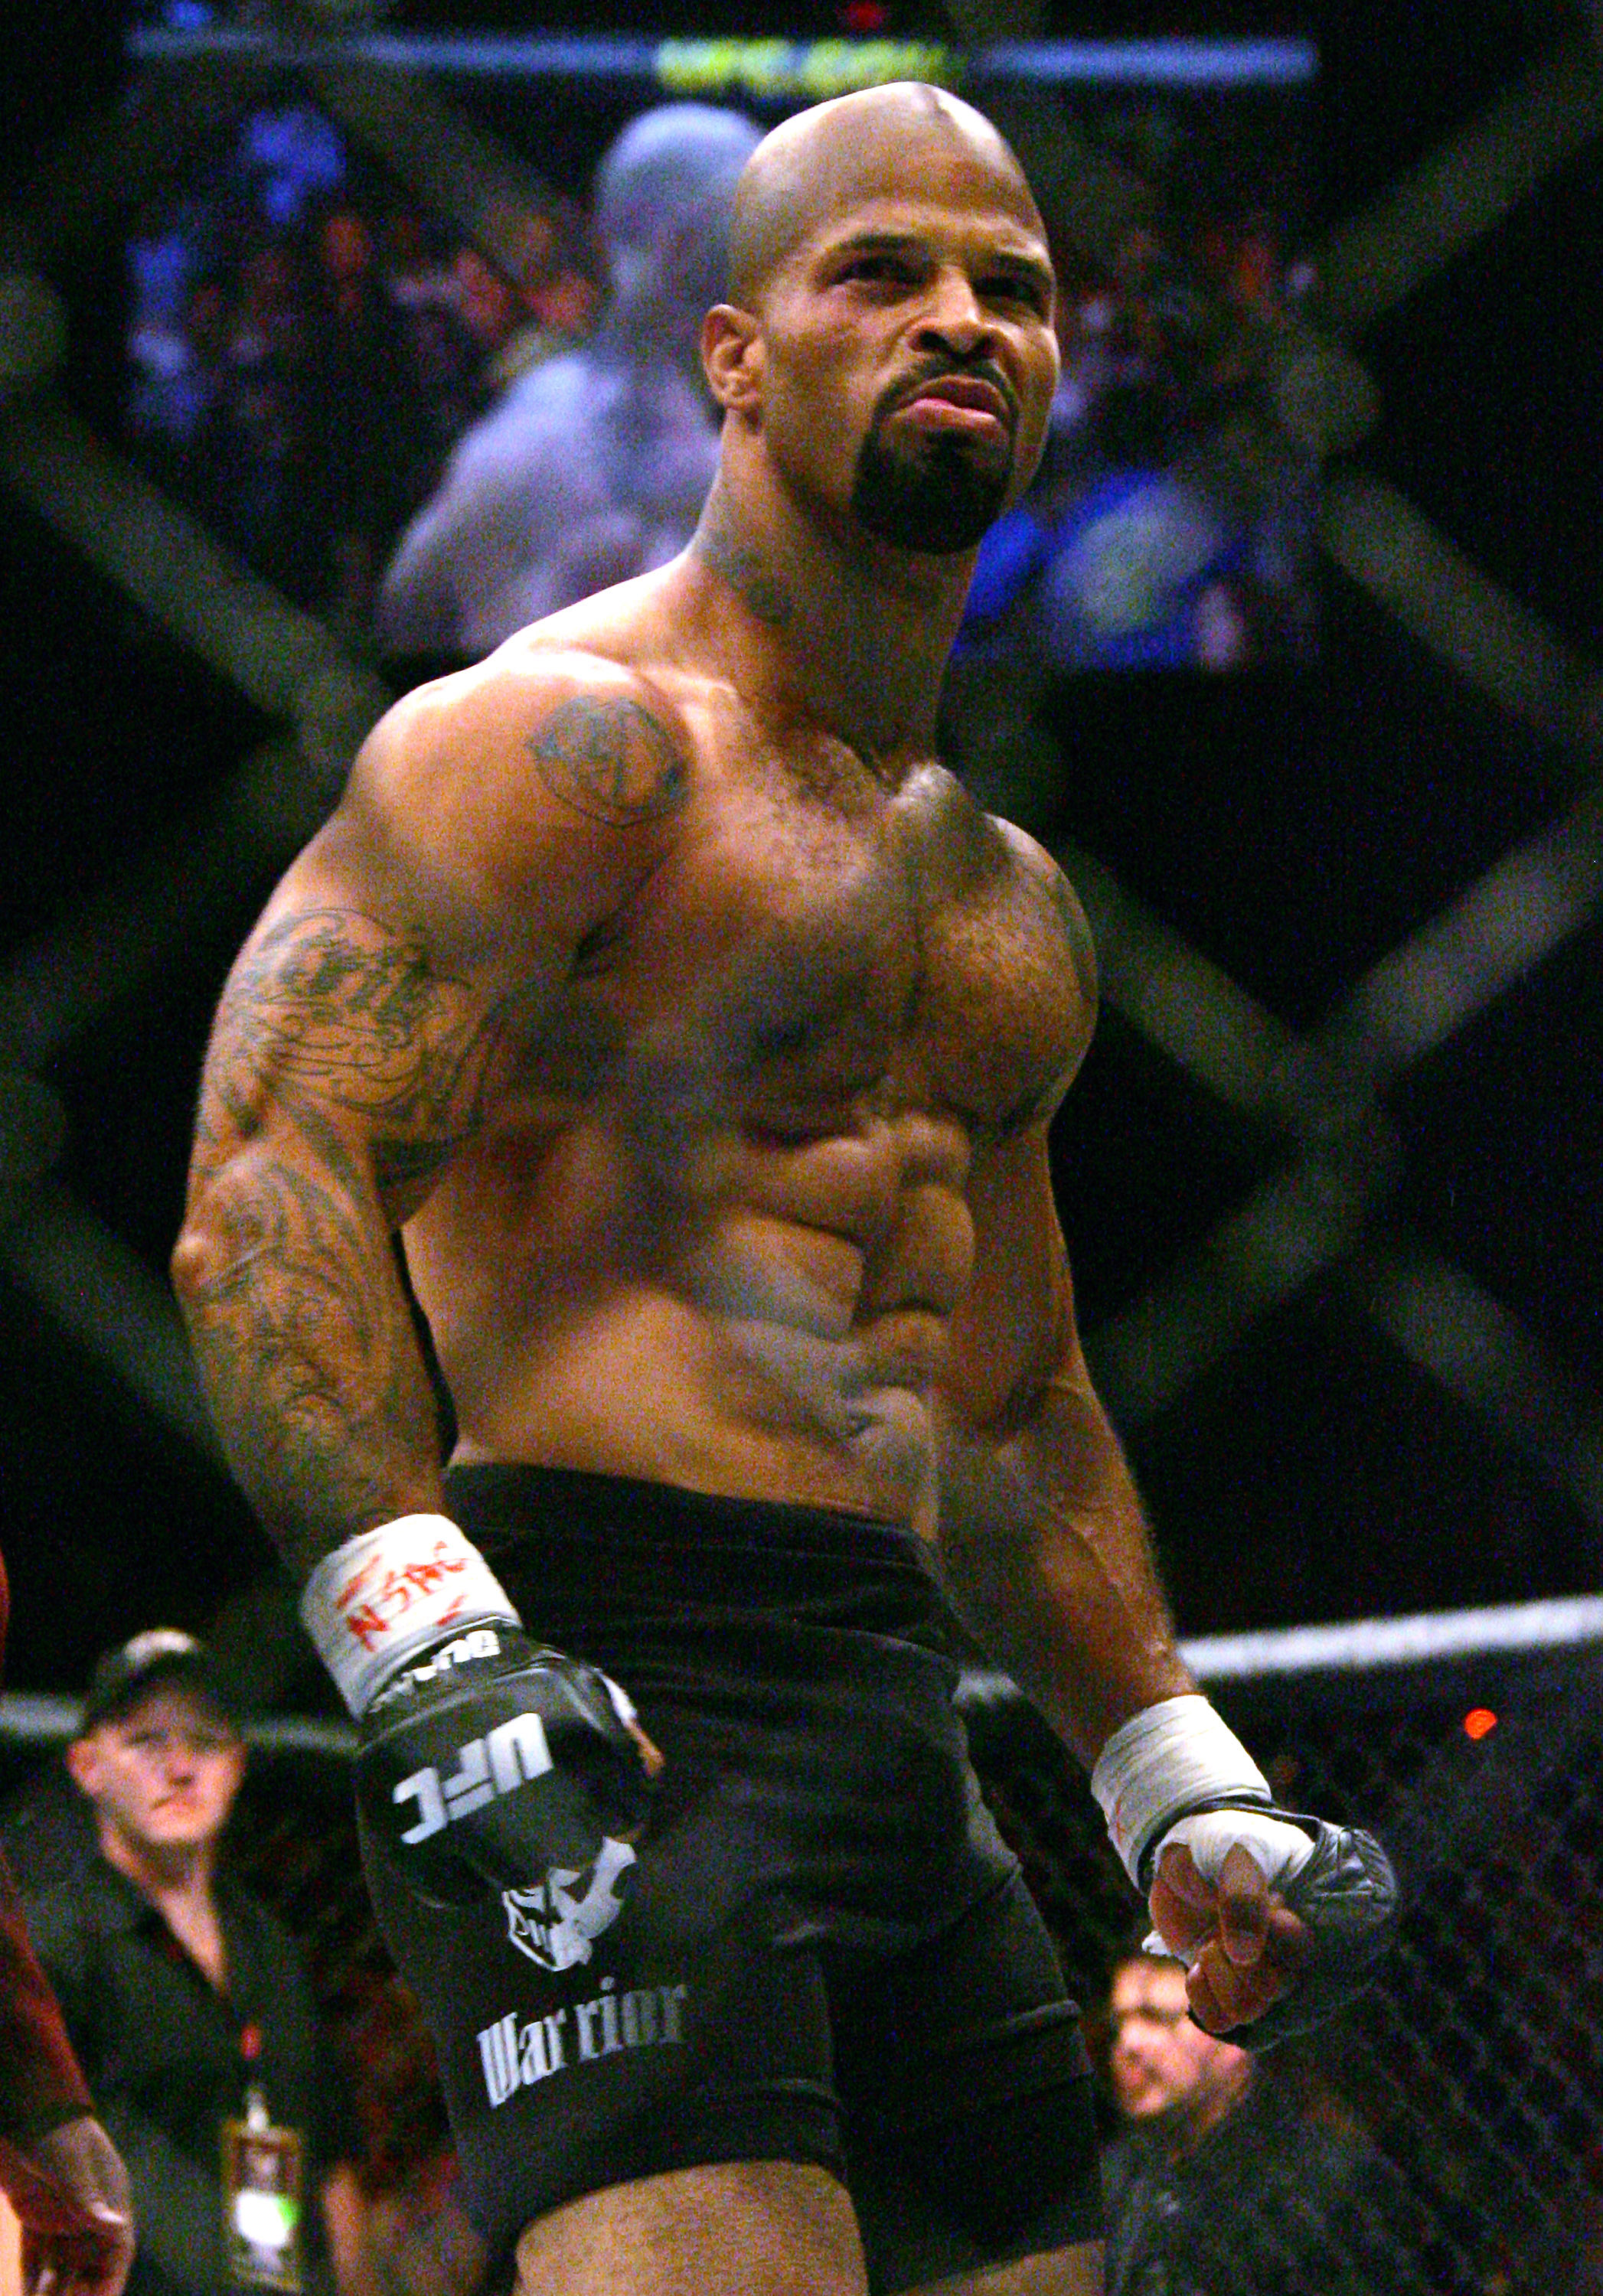 Houston Alexander when he fought Keith Jardine at UFC 71 in 2007.